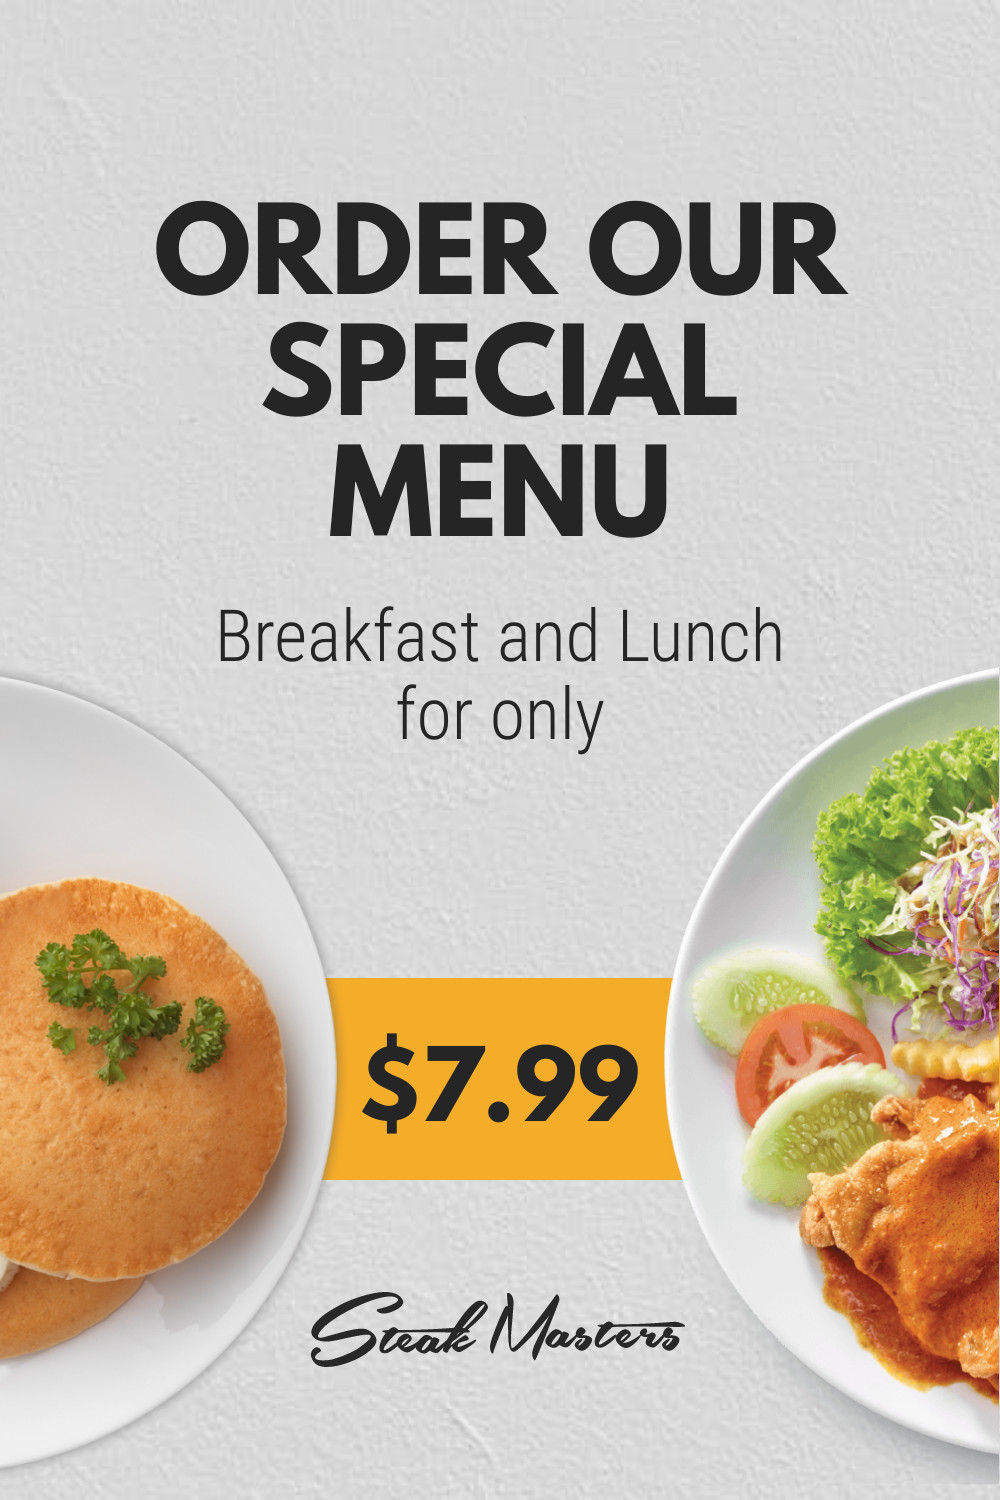 Special Menu Breakfast and Lunch Inline Rectangle 300x250